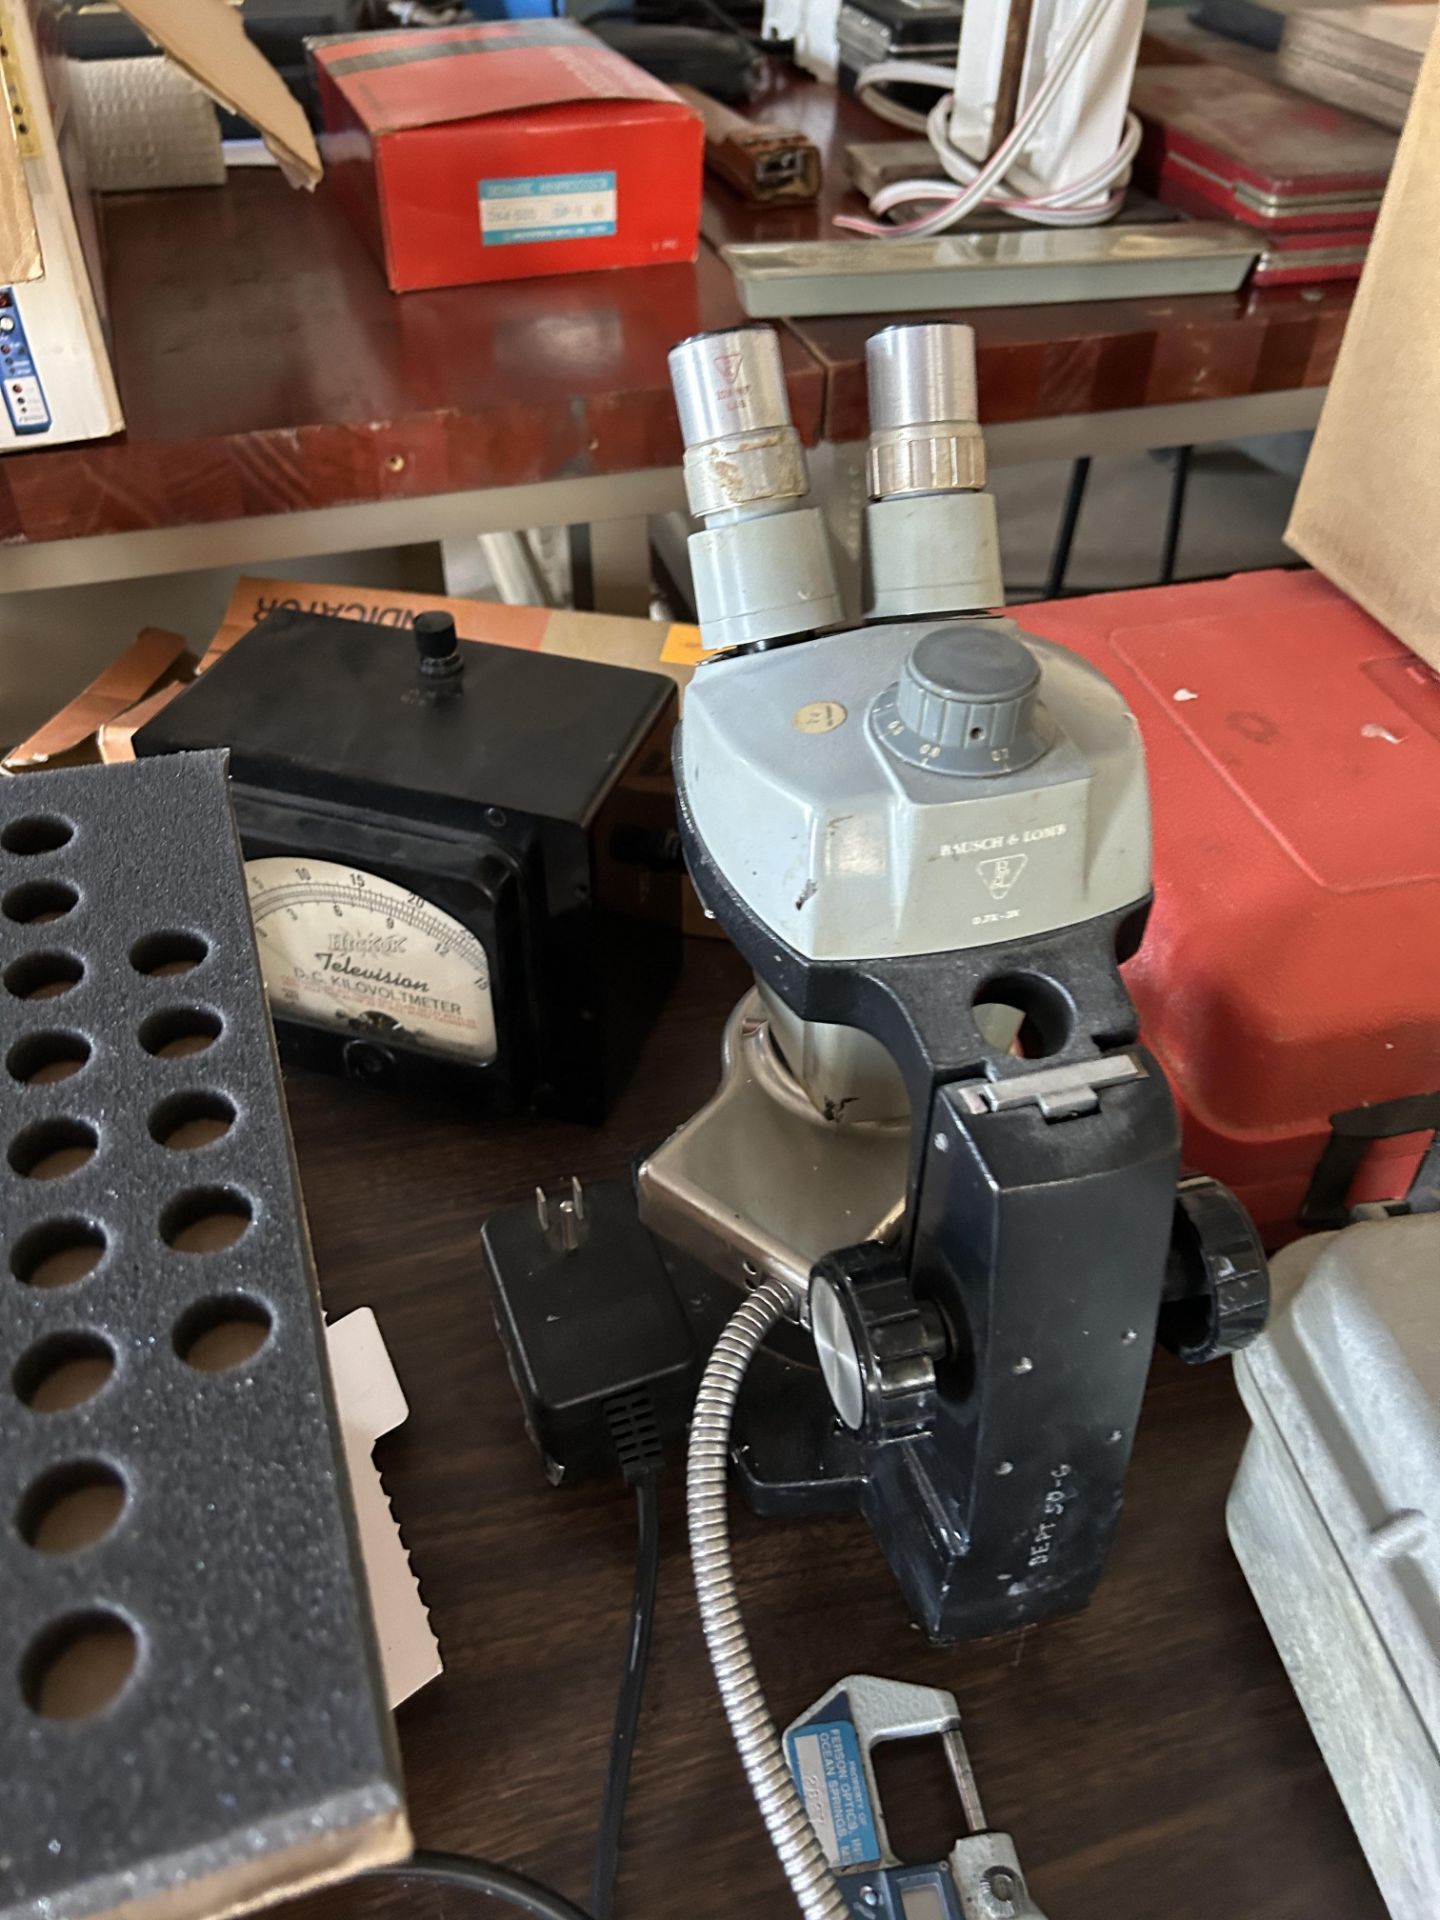 Entire Table of Calibration Type Equipment - Image 12 of 16